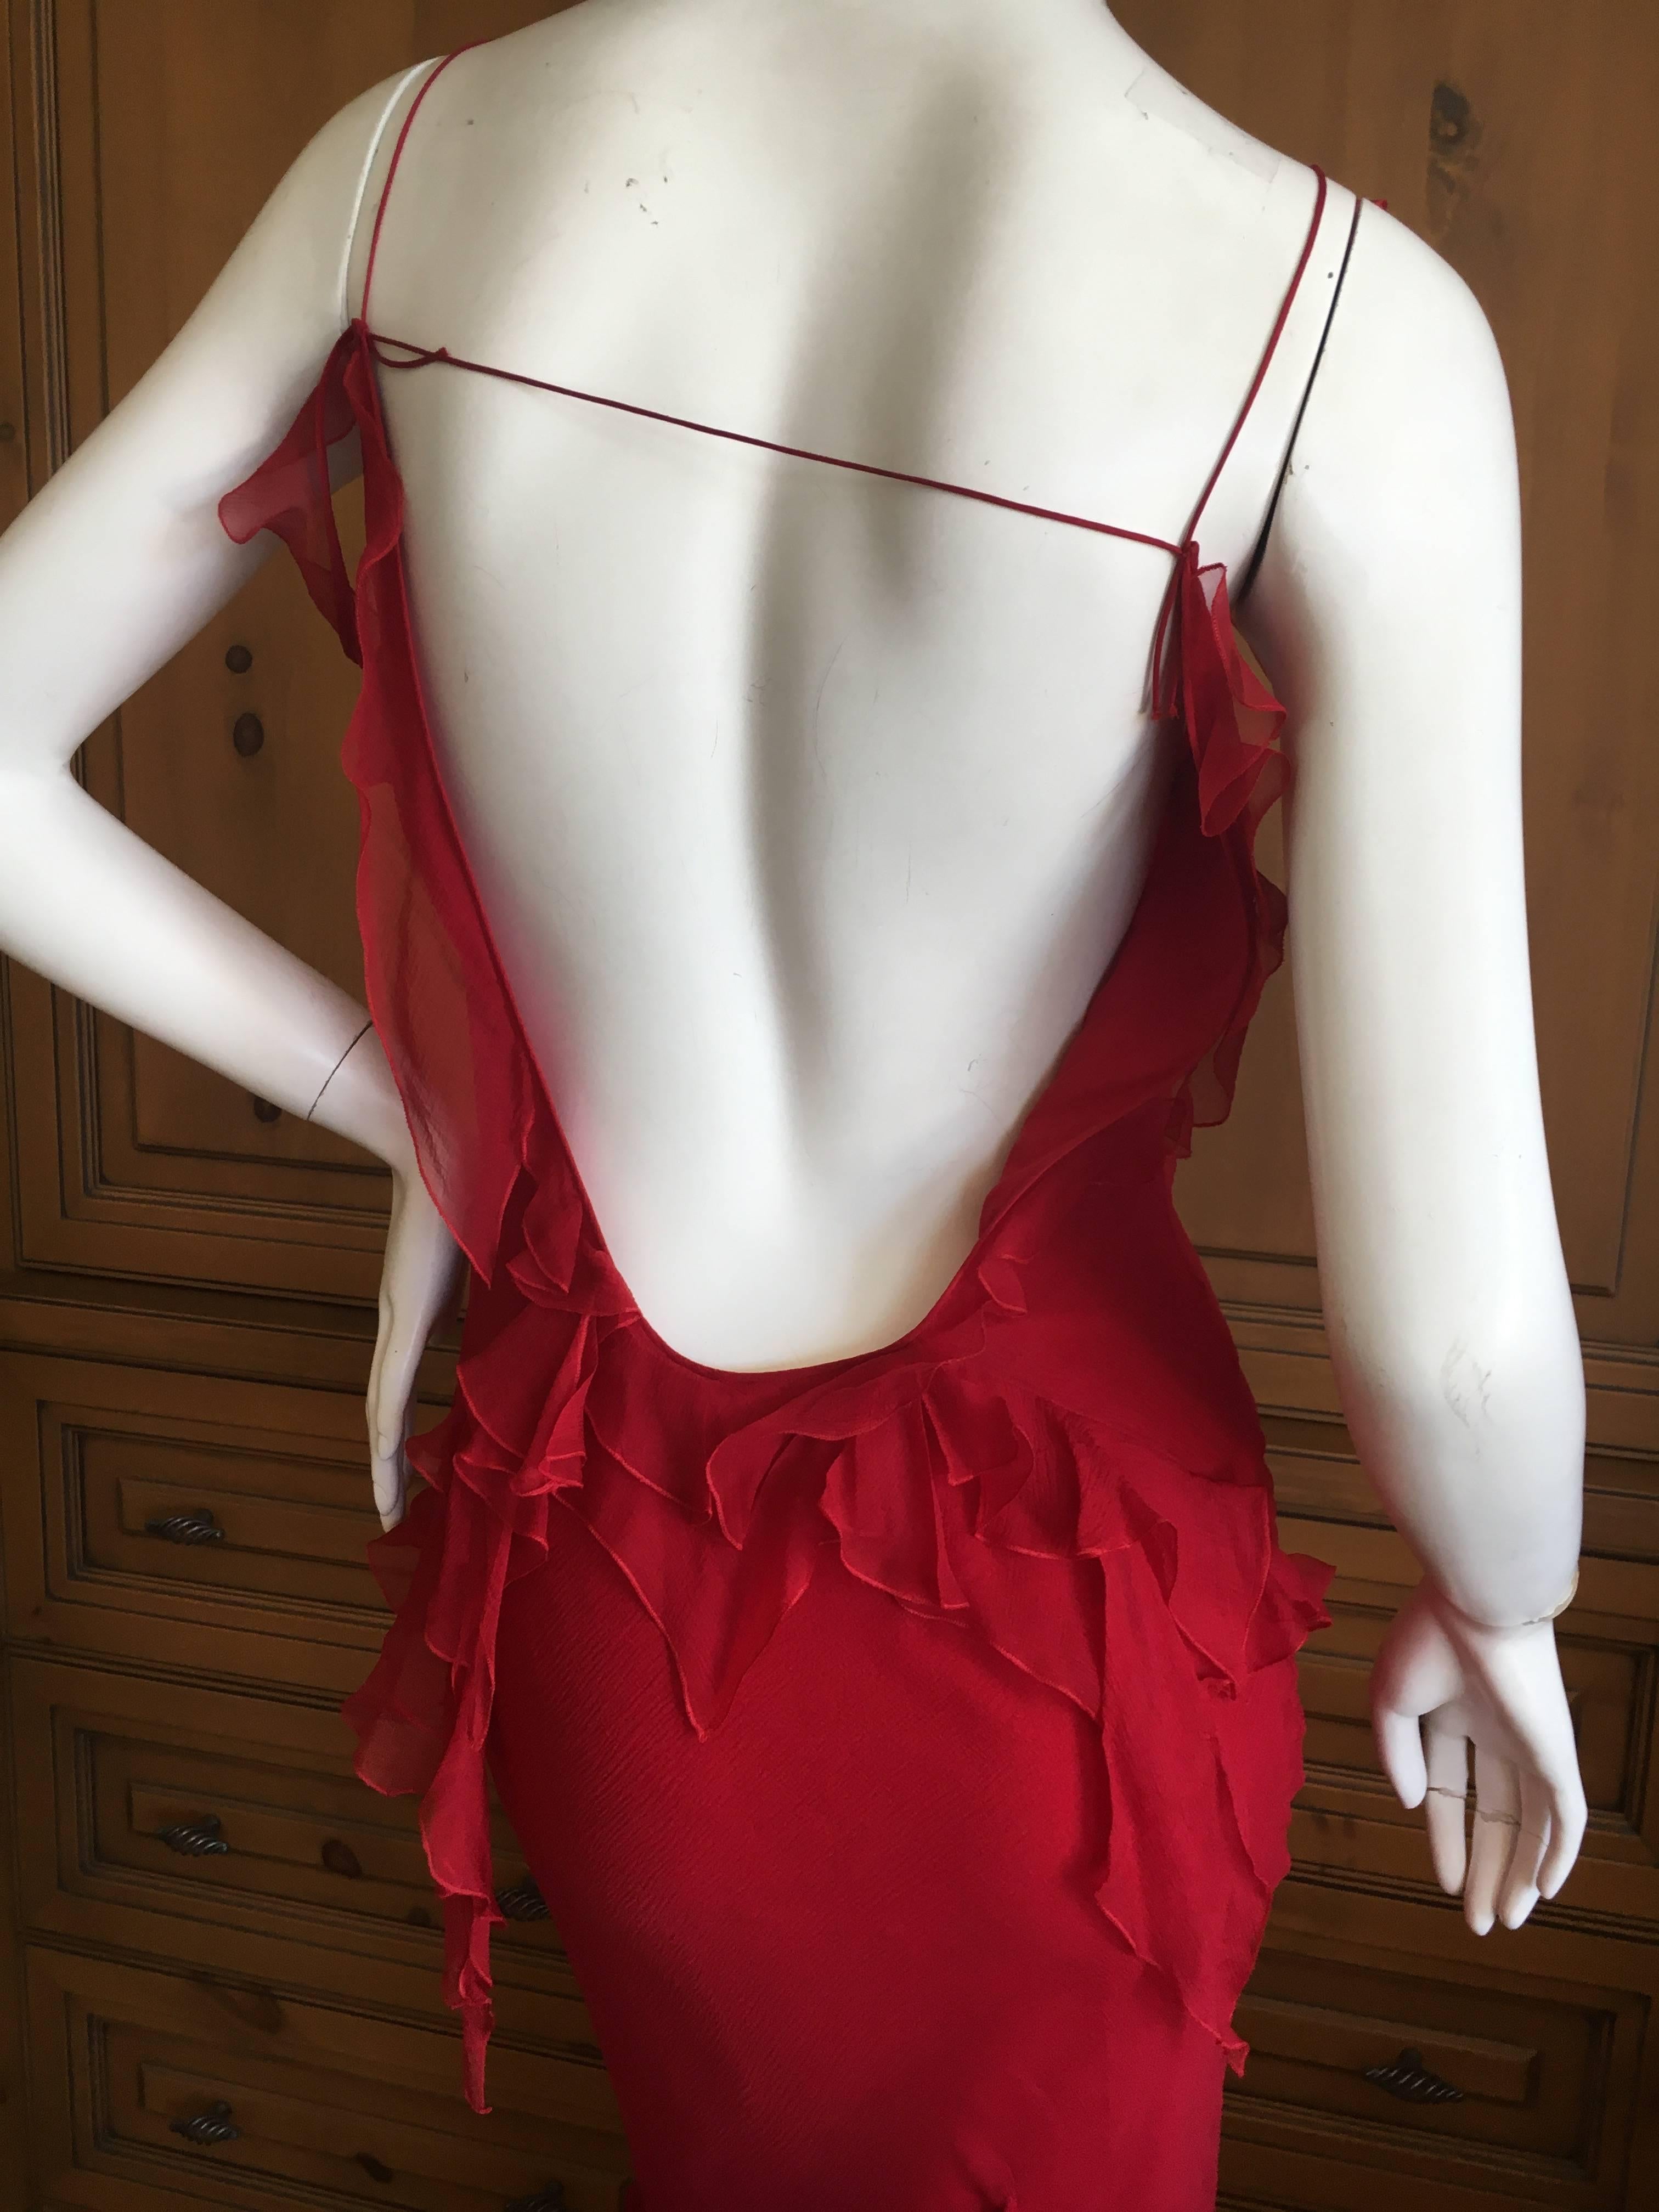 Christian Dior by John Galliano Ruffled Red Silk Dress.
This is so sweet, with multiple layers of sheer silk chiffon and a high slit in the front.
Size 36
Bust 38"
Waist 30"
Waist 39"
Length 59"
Excellent condition